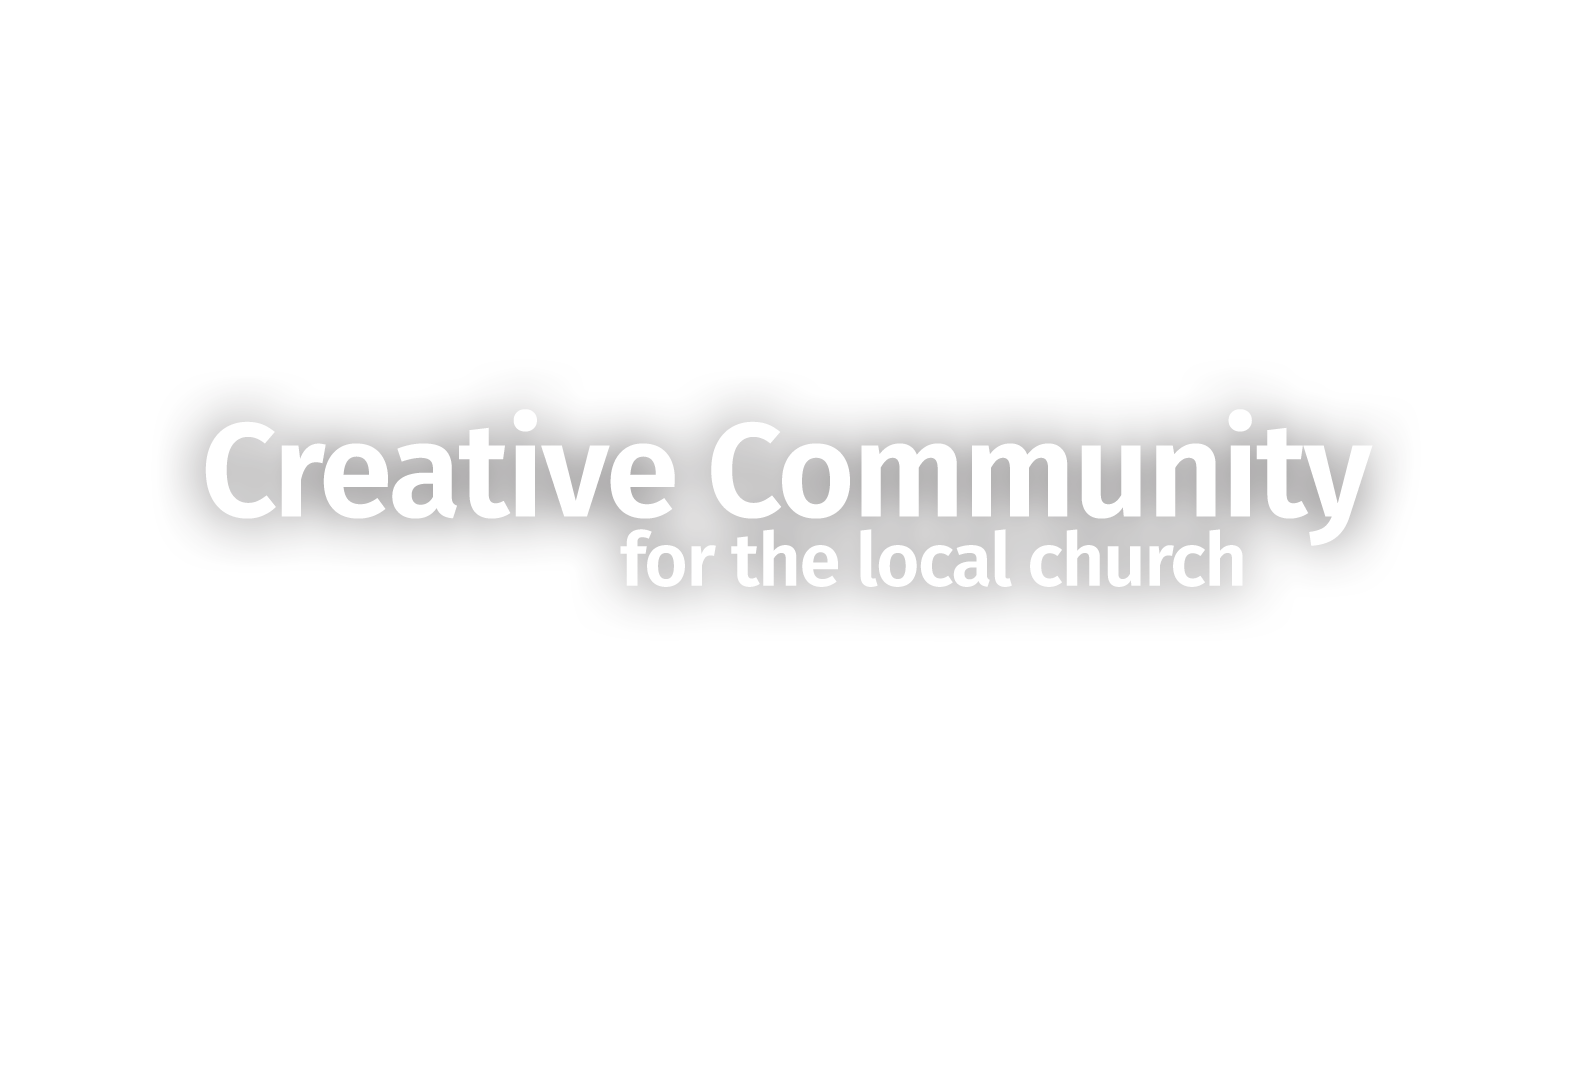 The Creative Community in the Church